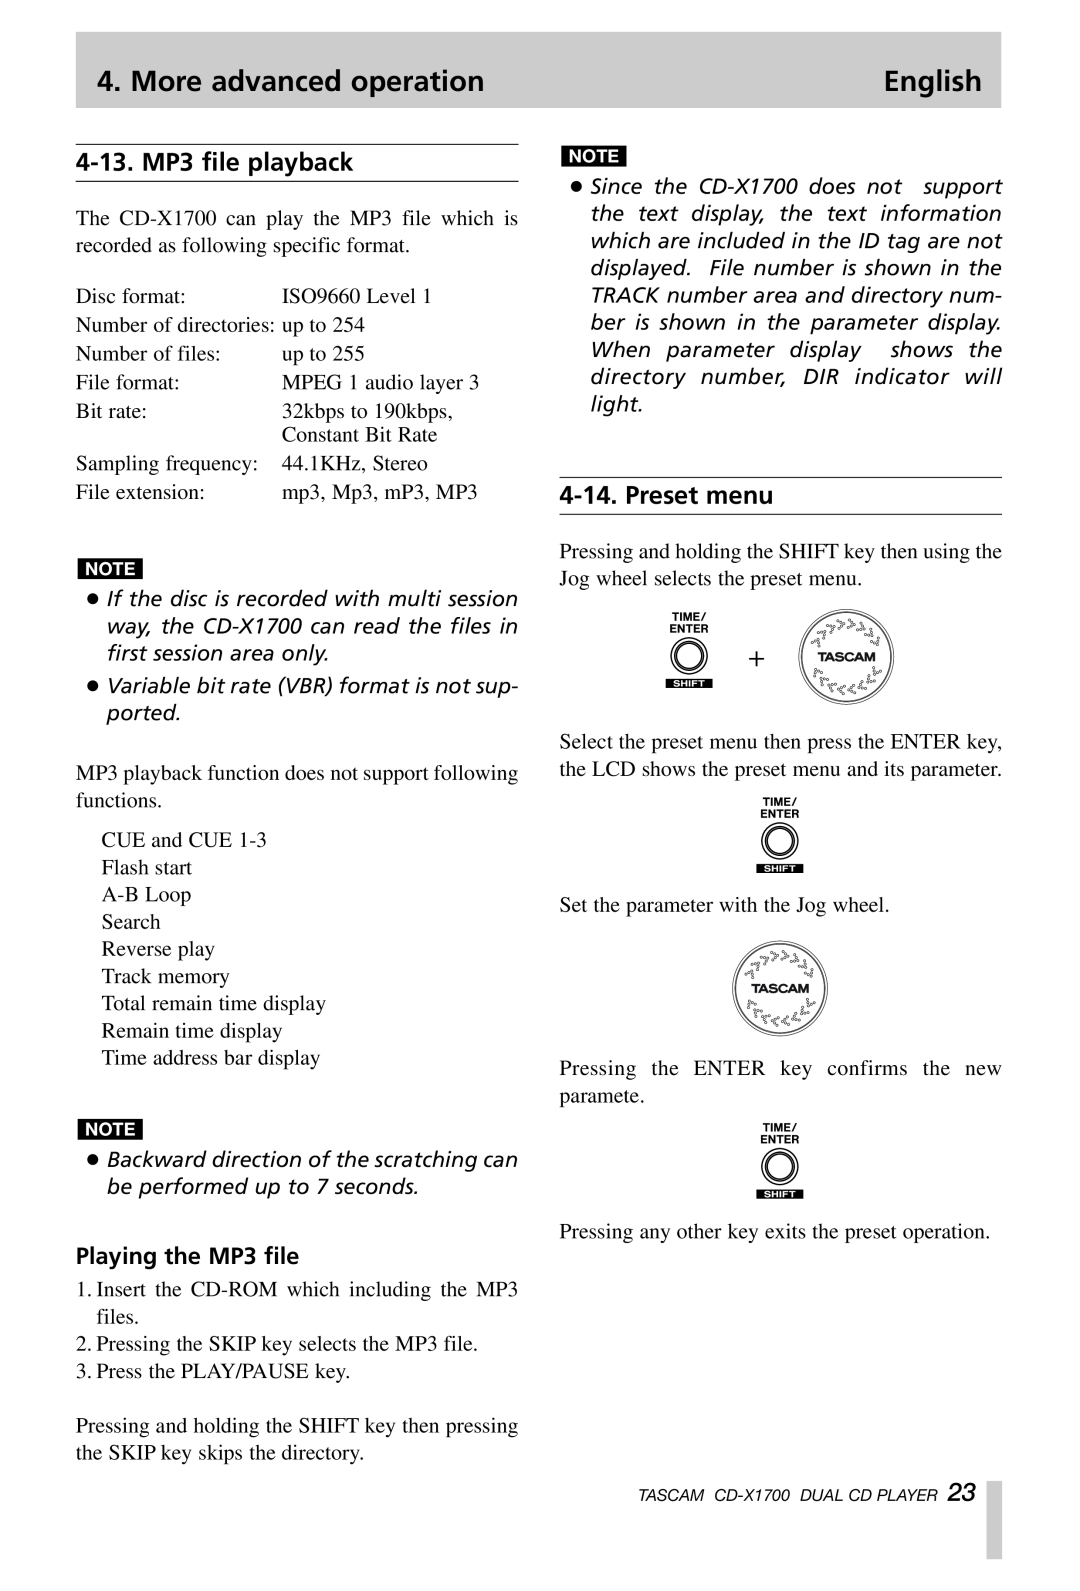 Tascam CD-X1700 owner manual 4-13.MP3 file playback, Preset menu, Playing the MP3 file, More advanced operation, English 